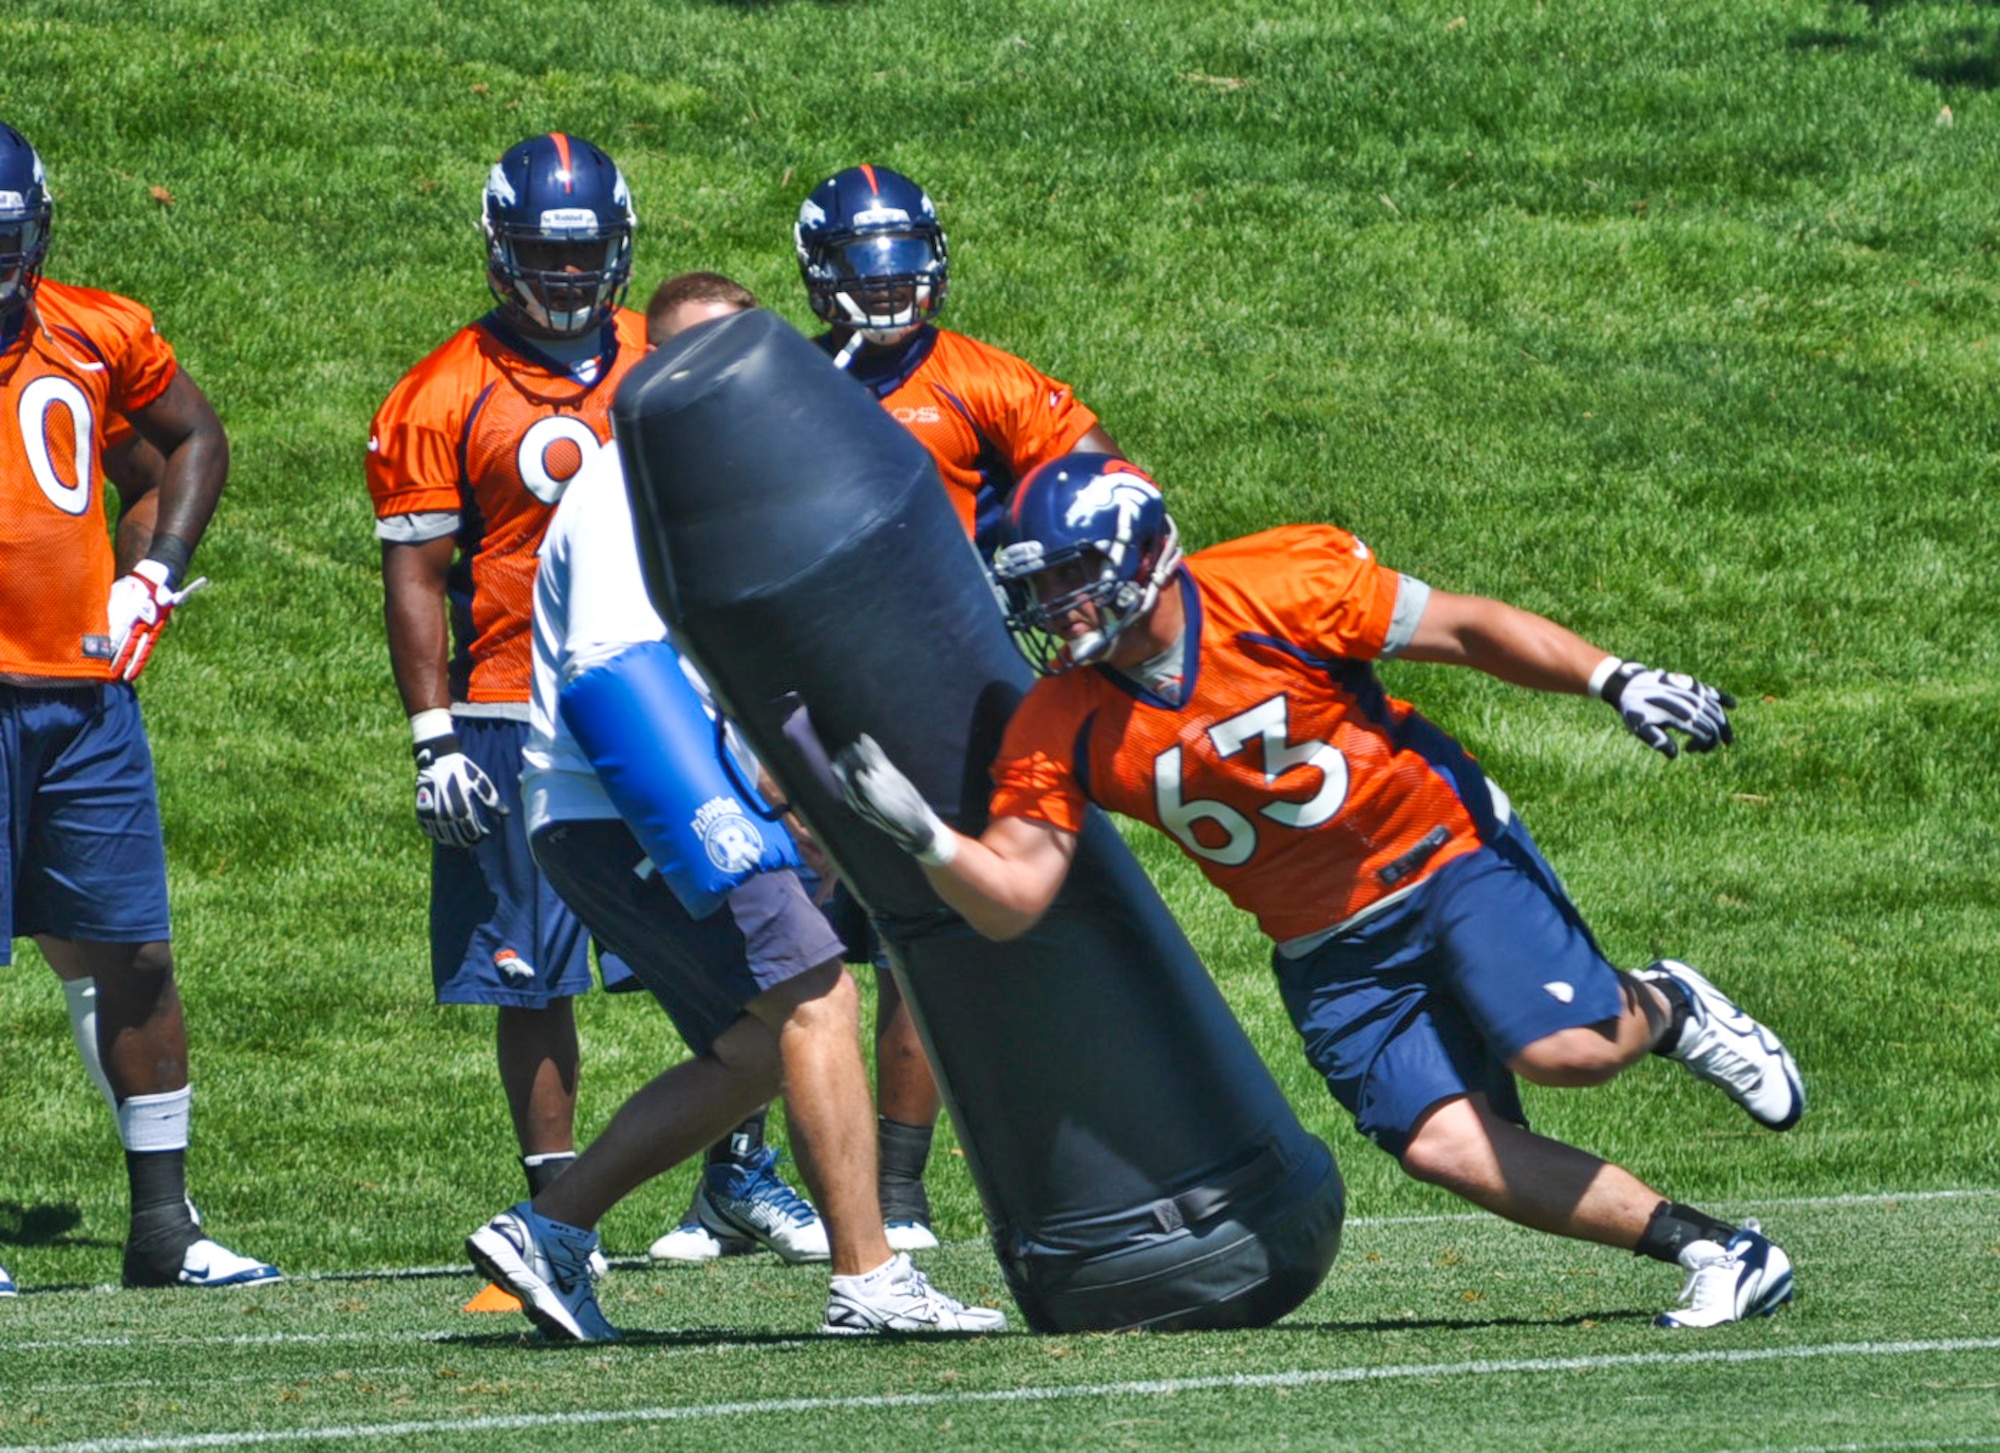 ENGLEWOOD, Colo. – Benjamin Garland makes his way around a “dummy bag” during a Denver Broncos mini-camp session June 13, 2012. Garland participated in the three-day mini-camp which took place from June 12-14. He is currently assigned to the 140 Wing Public Affairs Office, Colorado Air National Guard. (U.S. Air Force photo by Senior Airman Christopher Gross)